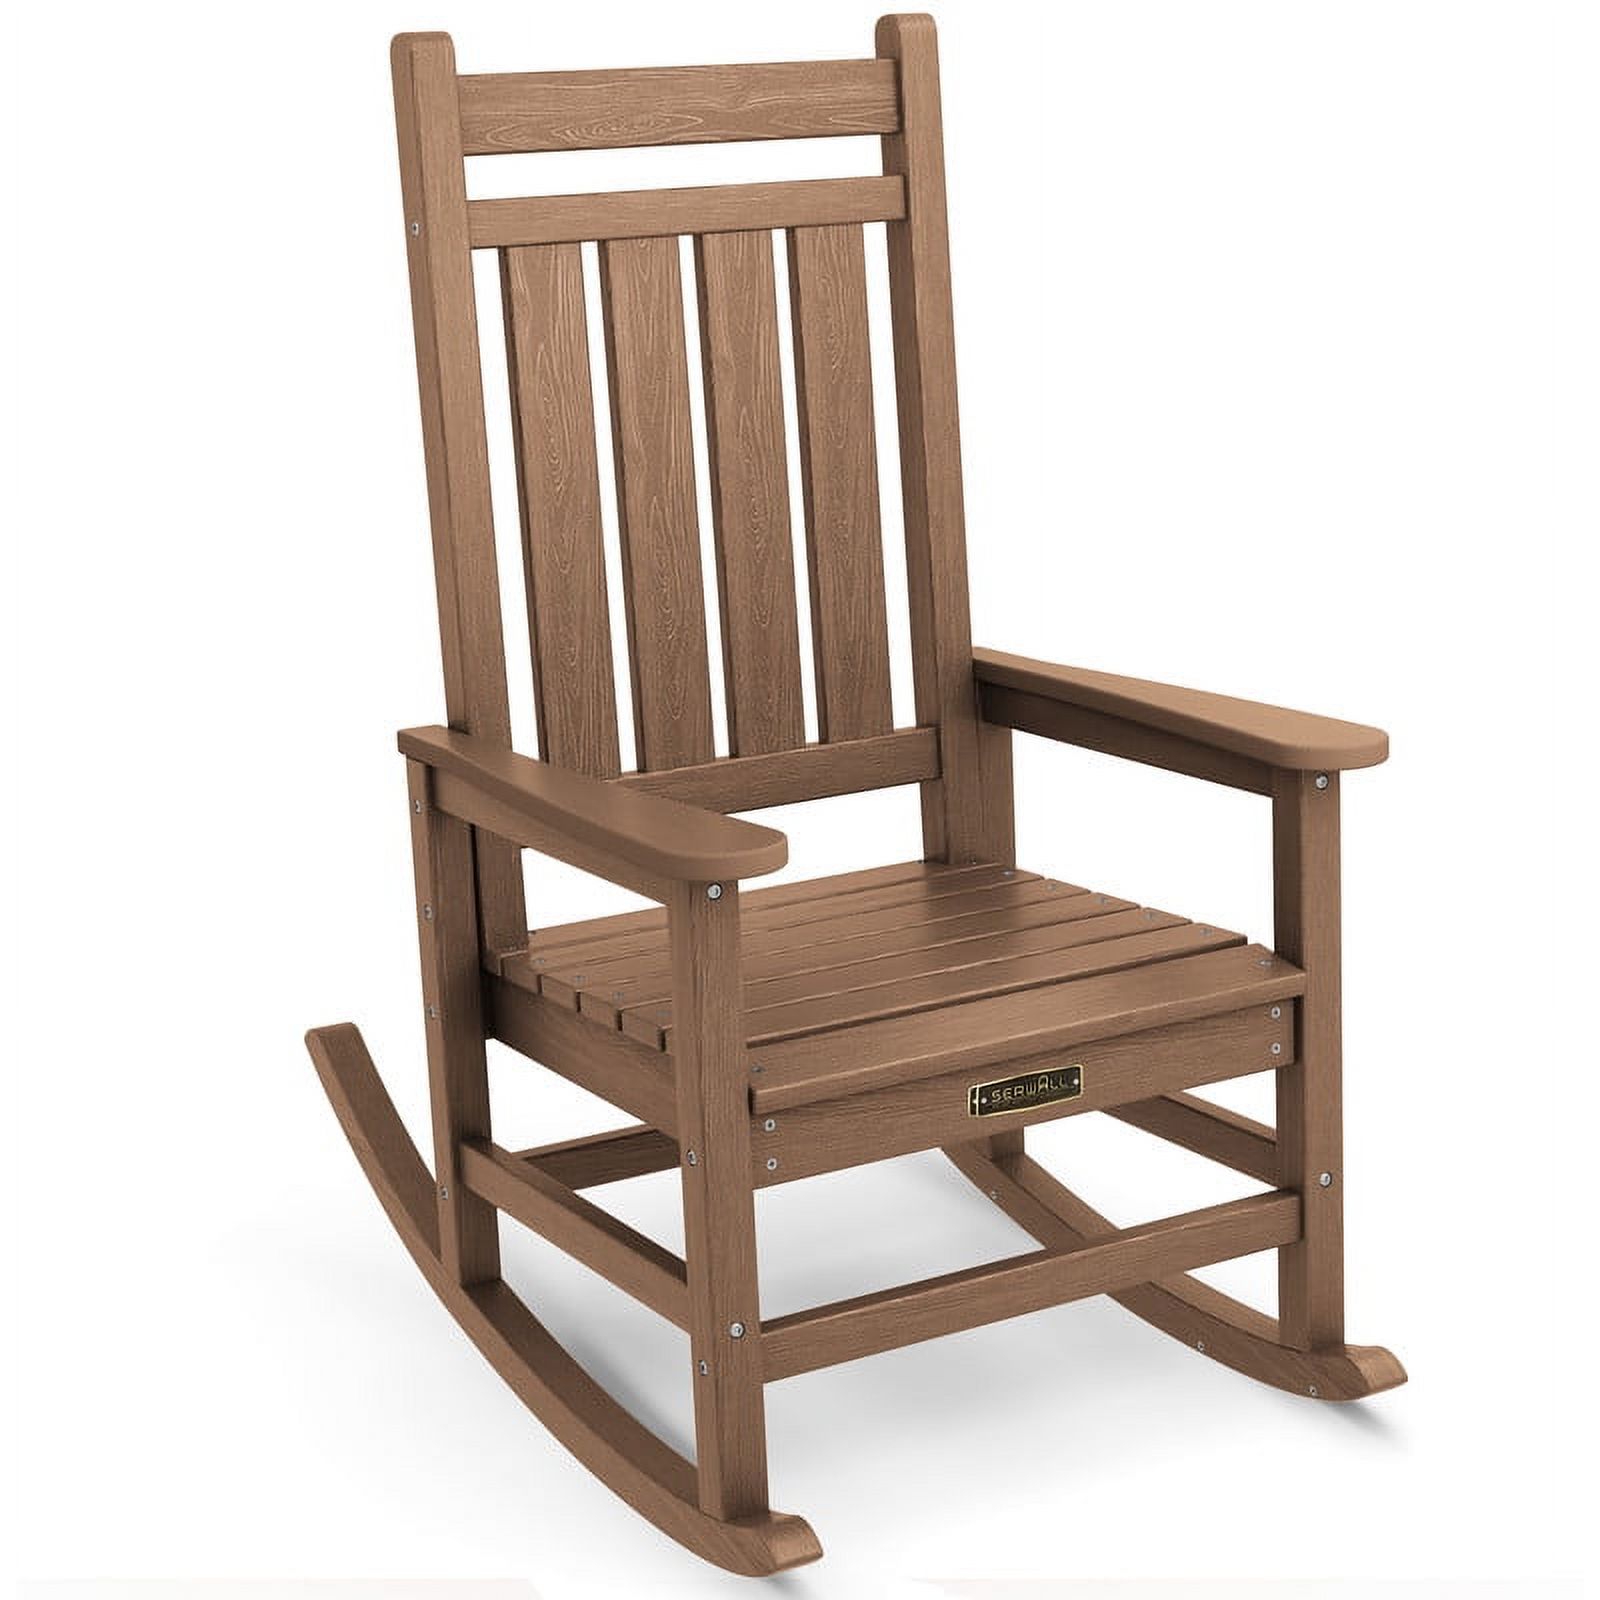 ROWHY Outdoor Oversized Slat Rocking Chair, Brown - image 2 of 6